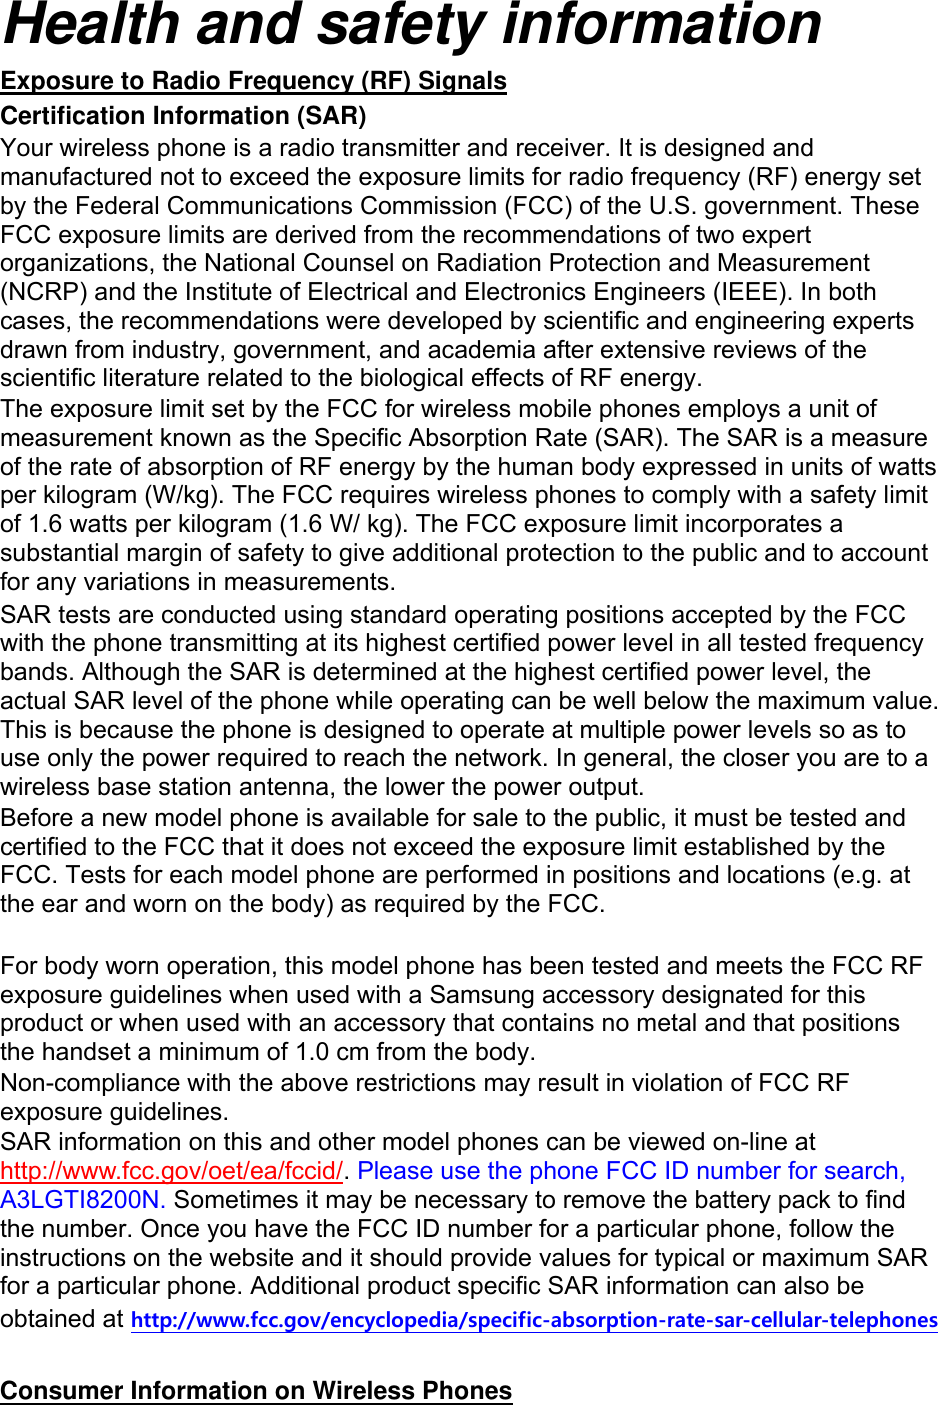 Health and safety information Exposure to Radio Frequency (RF) Signals Certification Information (SAR) Your wireless phone is a radio transmitter and receiver. It is designed and manufactured not to exceed the exposure limits for radio frequency (RF) energy set by the Federal Communications Commission (FCC) of the U.S. government. These FCC exposure limits are derived from the recommendations of two expert organizations, the National Counsel on Radiation Protection and Measurement (NCRP) and the Institute of Electrical and Electronics Engineers (IEEE). In both cases, the recommendations were developed by scientific and engineering experts drawn from industry, government, and academia after extensive reviews of the scientific literature related to the biological effects of RF energy. The exposure limit set by the FCC for wireless mobile phones employs a unit of measurement known as the Specific Absorption Rate (SAR). The SAR is a measure of the rate of absorption of RF energy by the human body expressed in units of watts per kilogram (W/kg). The FCC requires wireless phones to comply with a safety limit of 1.6 watts per kilogram (1.6 W/ kg). The FCC exposure limit incorporates a substantial margin of safety to give additional protection to the public and to account for any variations in measurements. SAR tests are conducted using standard operating positions accepted by the FCC with the phone transmitting at its highest certified power level in all tested frequency bands. Although the SAR is determined at the highest certified power level, the actual SAR level of the phone while operating can be well below the maximum value. This is because the phone is designed to operate at multiple power levels so as to use only the power required to reach the network. In general, the closer you are to a wireless base station antenna, the lower the power output. Before a new model phone is available for sale to the public, it must be tested and certified to the FCC that it does not exceed the exposure limit established by the FCC. Tests for each model phone are performed in positions and locations (e.g. at the ear and worn on the body) as required by the FCC.      For body worn operation, this model phone has been tested and meets the FCC RF exposure guidelines when used with a Samsung accessory designated for this product or when used with an accessory that contains no metal and that positions the handset a minimum of 1.0 cm from the body.   Non-compliance with the above restrictions may result in violation of FCC RF exposure guidelines. SAR information on this and other model phones can be viewed on-line at http://www.fcc.gov/oet/ea/fccid/. Please use the phone FCC ID number for search, A3LGTI8200N. Sometimes it may be necessary to remove the battery pack to find the number. Once you have the FCC ID number for a particular phone, follow the instructions on the website and it should provide values for typical or maximum SAR for a particular phone. Additional product specific SAR information can also be obtained at http://www.fcc.gov/encyclopedia/specific-absorption-rate-sar-cellular-telephones  Consumer Information on Wireless Phones 